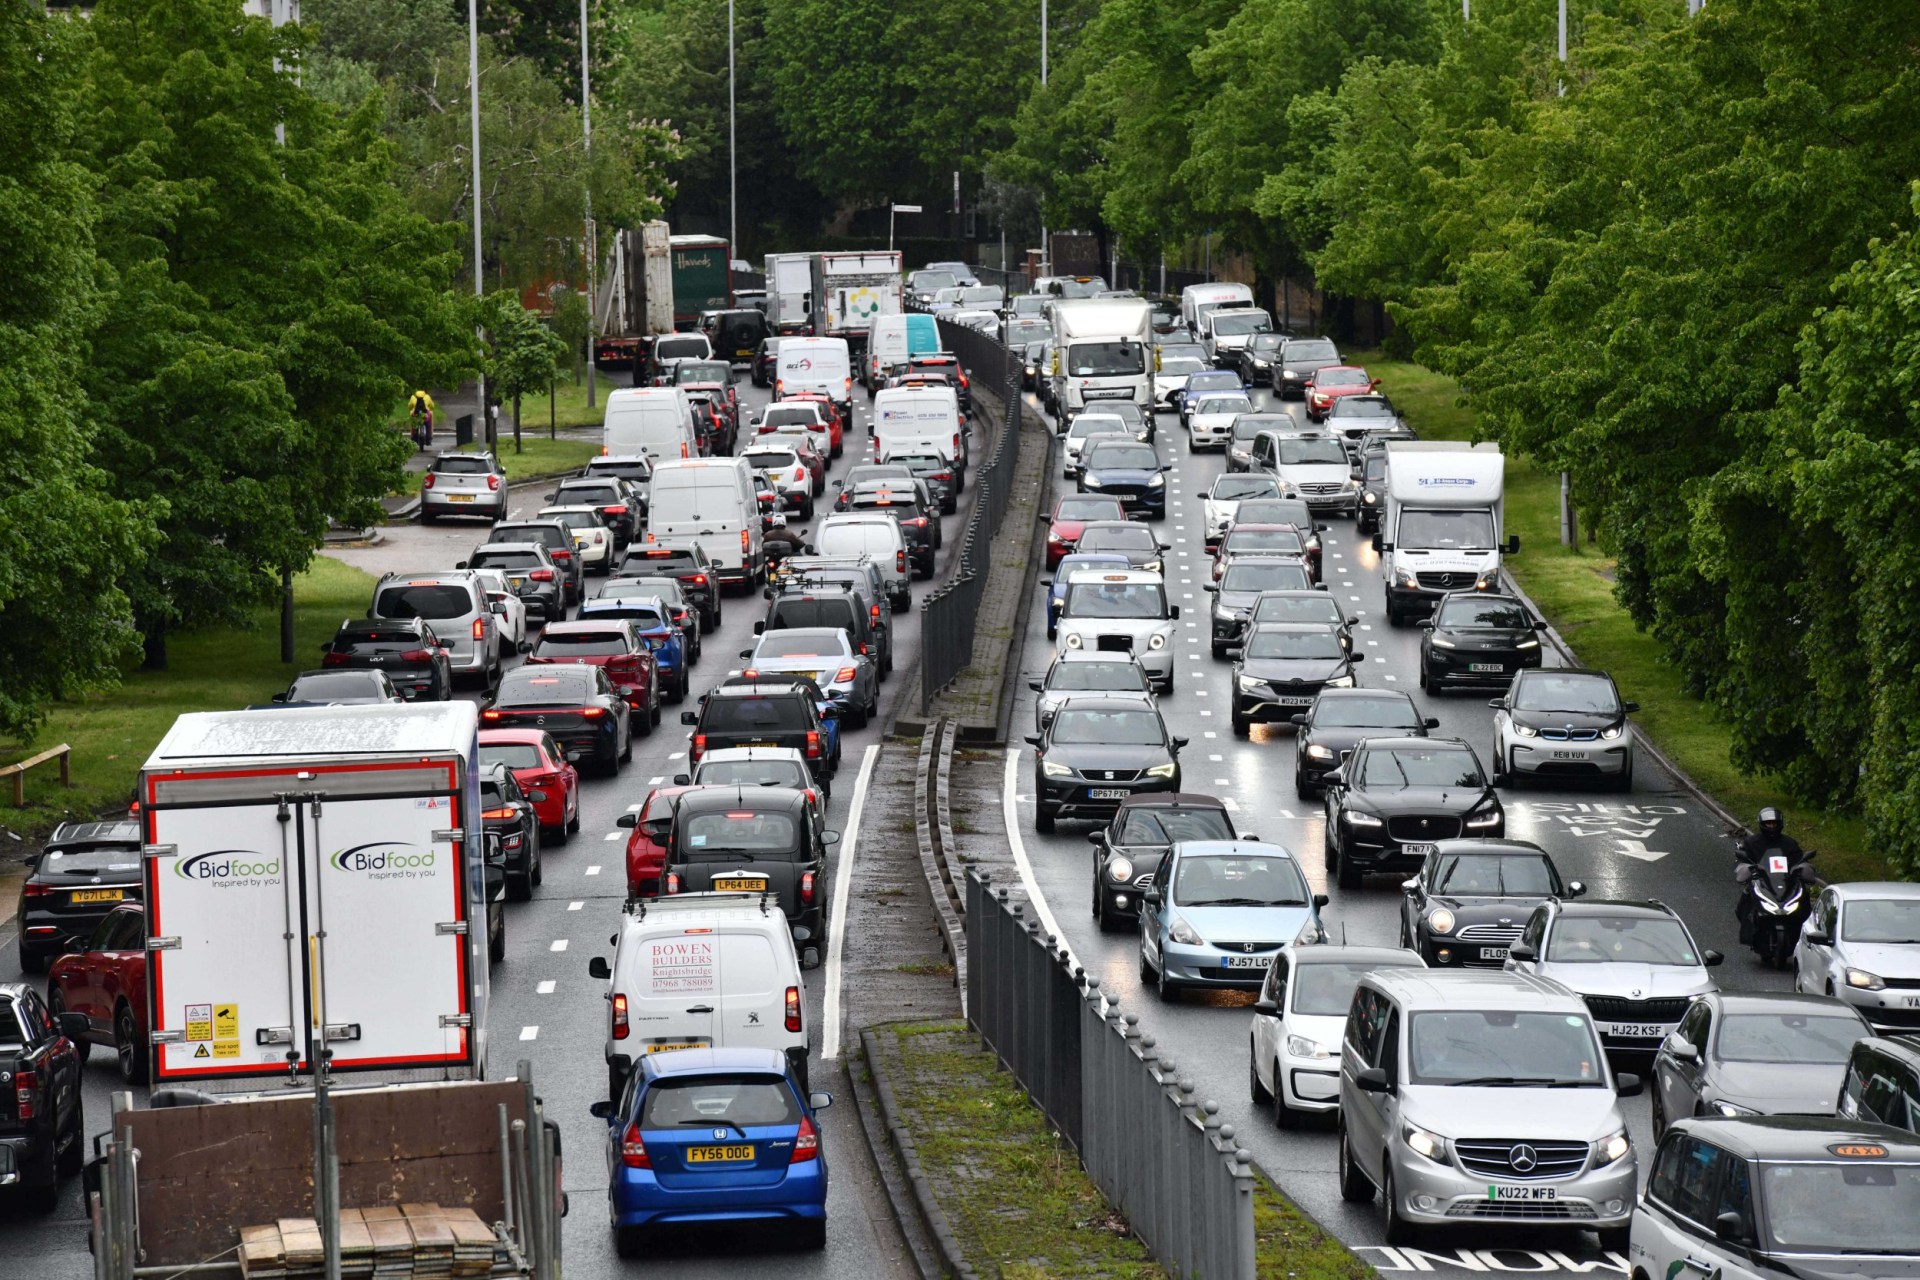 travel chaos for bank holiday revellers heading home from weekend getaways